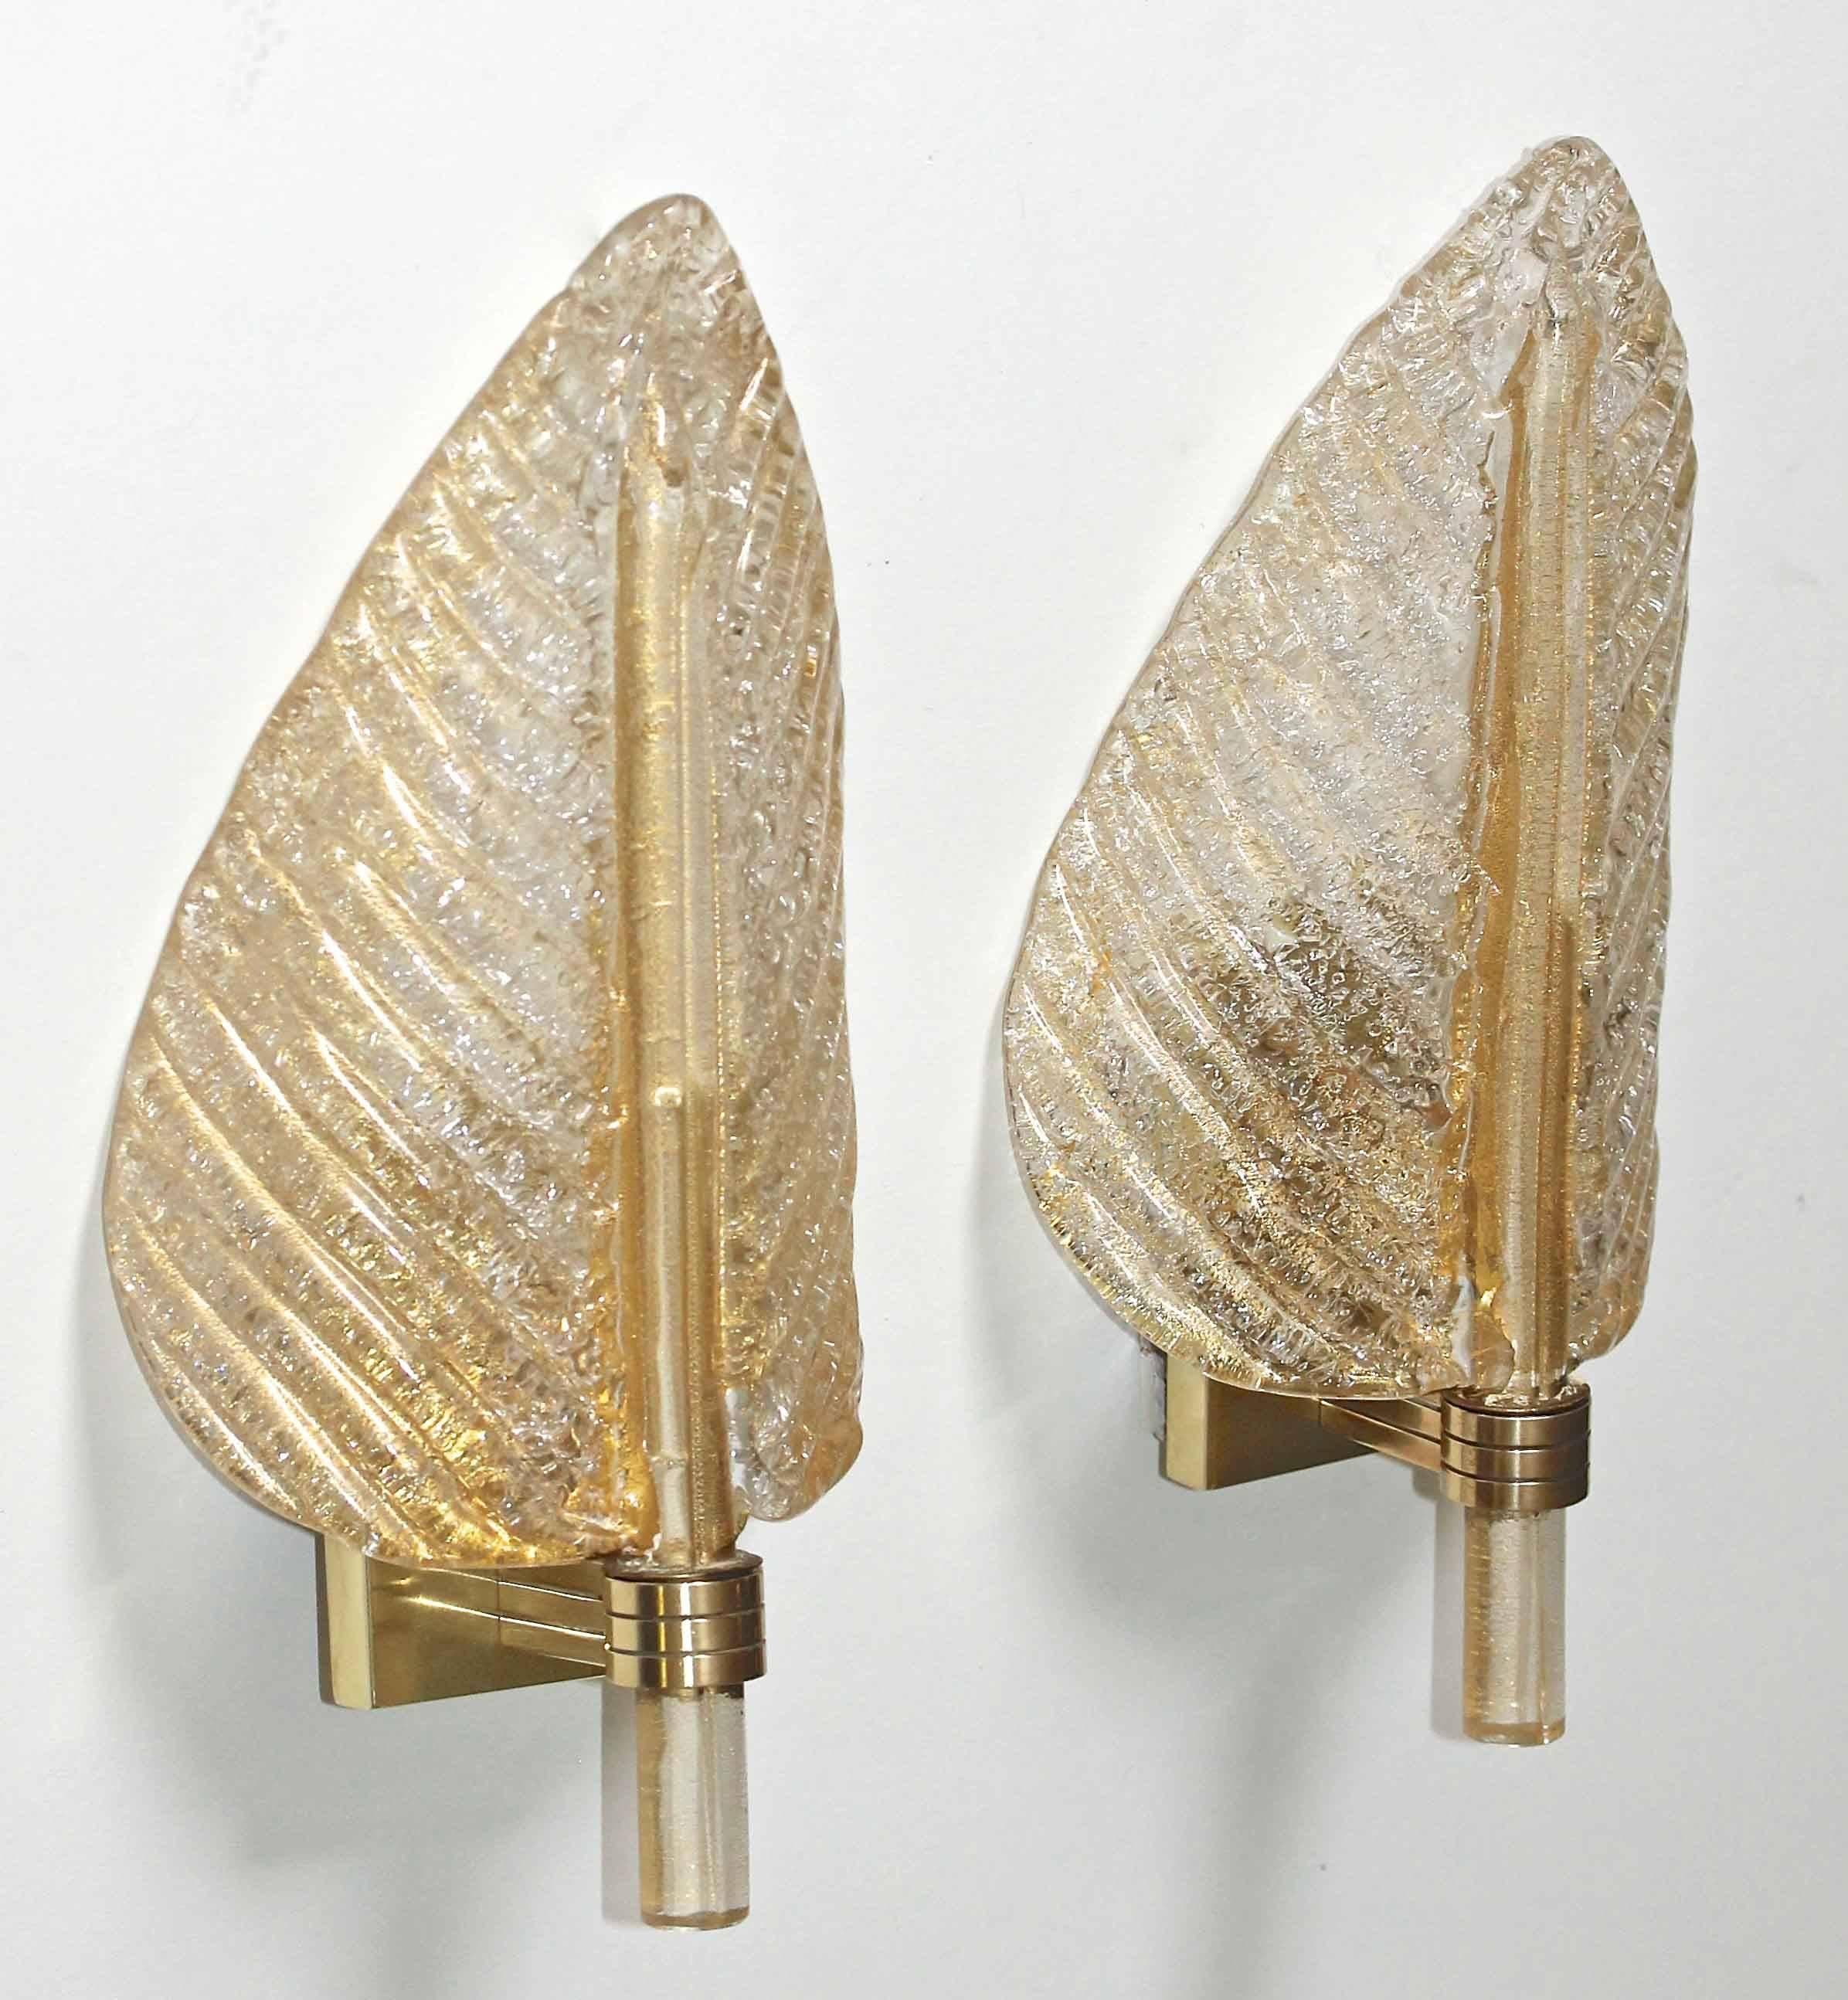 Pair of Murano gold infused glass wall sconces in plume or leaf form manufactured by Barovier & Toso. Reverse side of the glass in the "Rugiadoso" technique with scattered Fine particles of glass which diffuses light to a more even